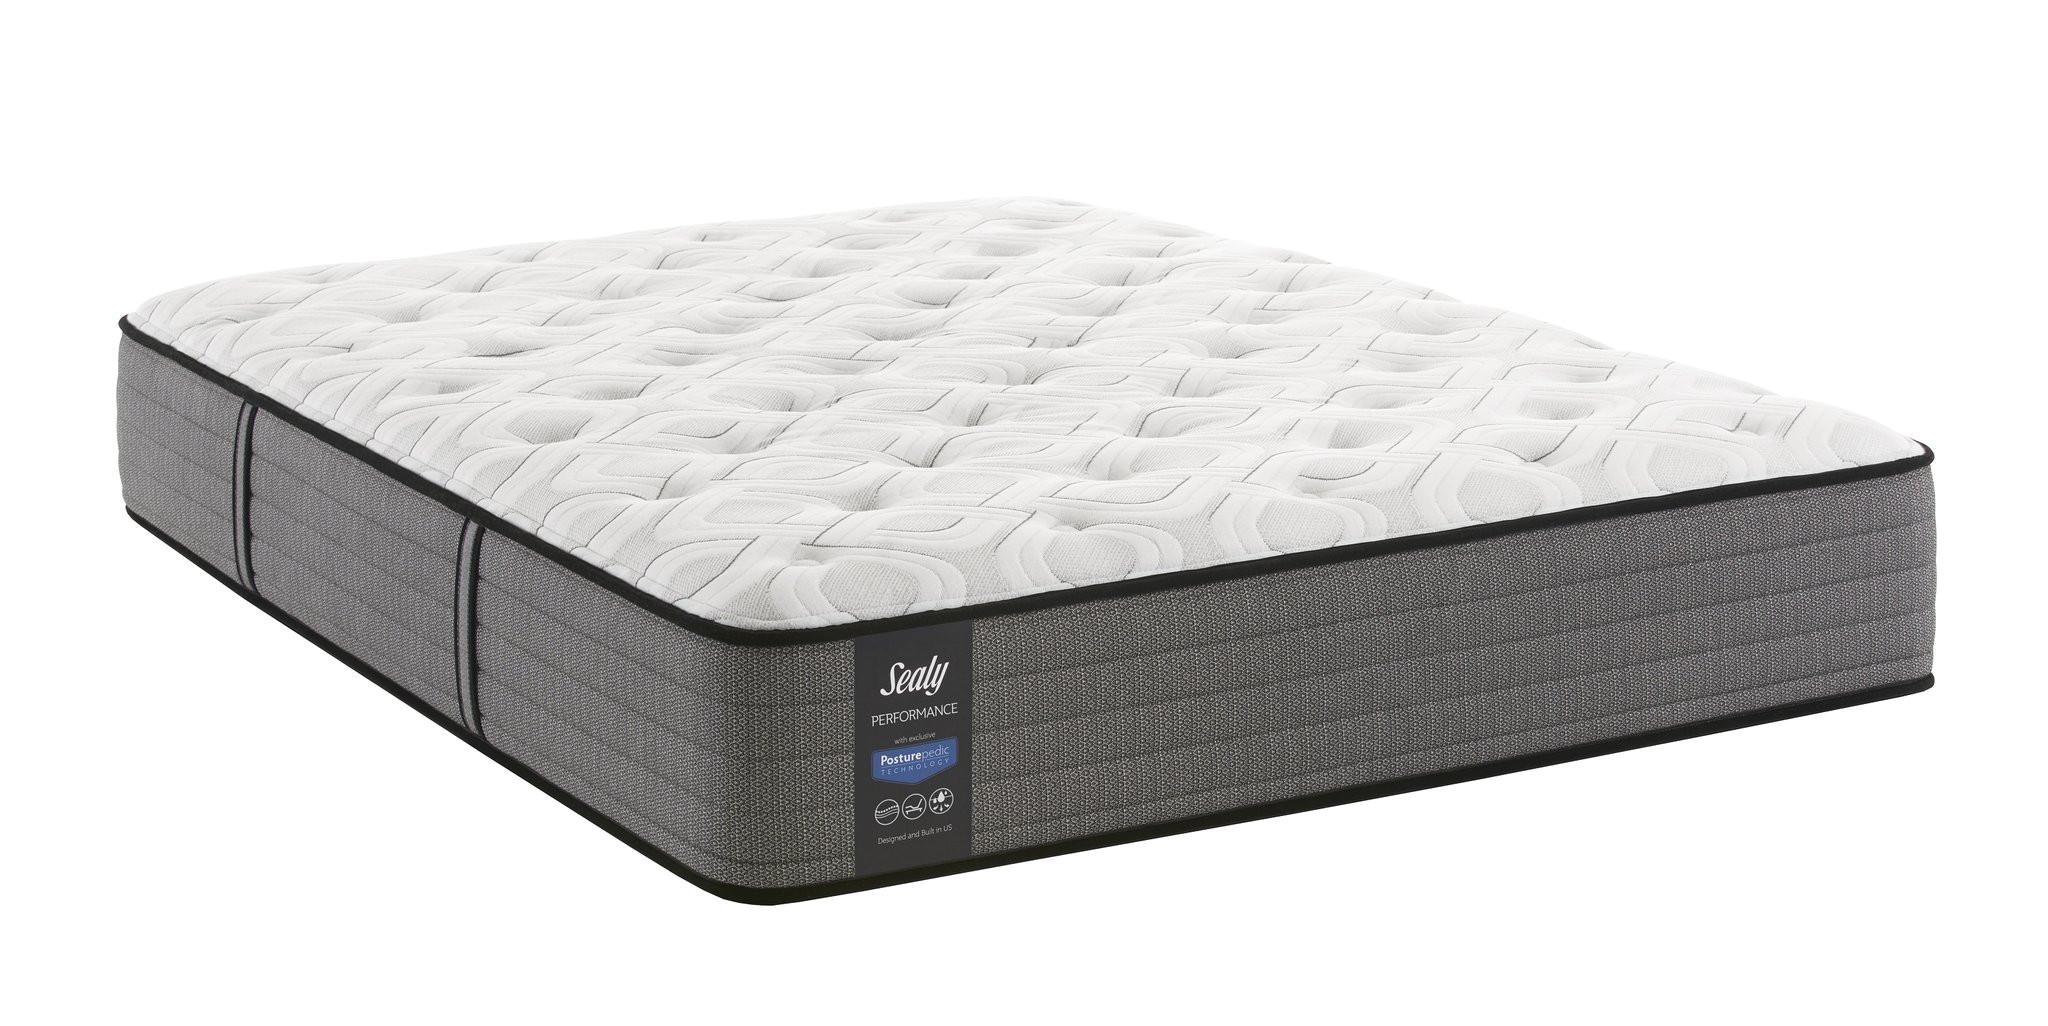 will a cushion firm mattress get any softer